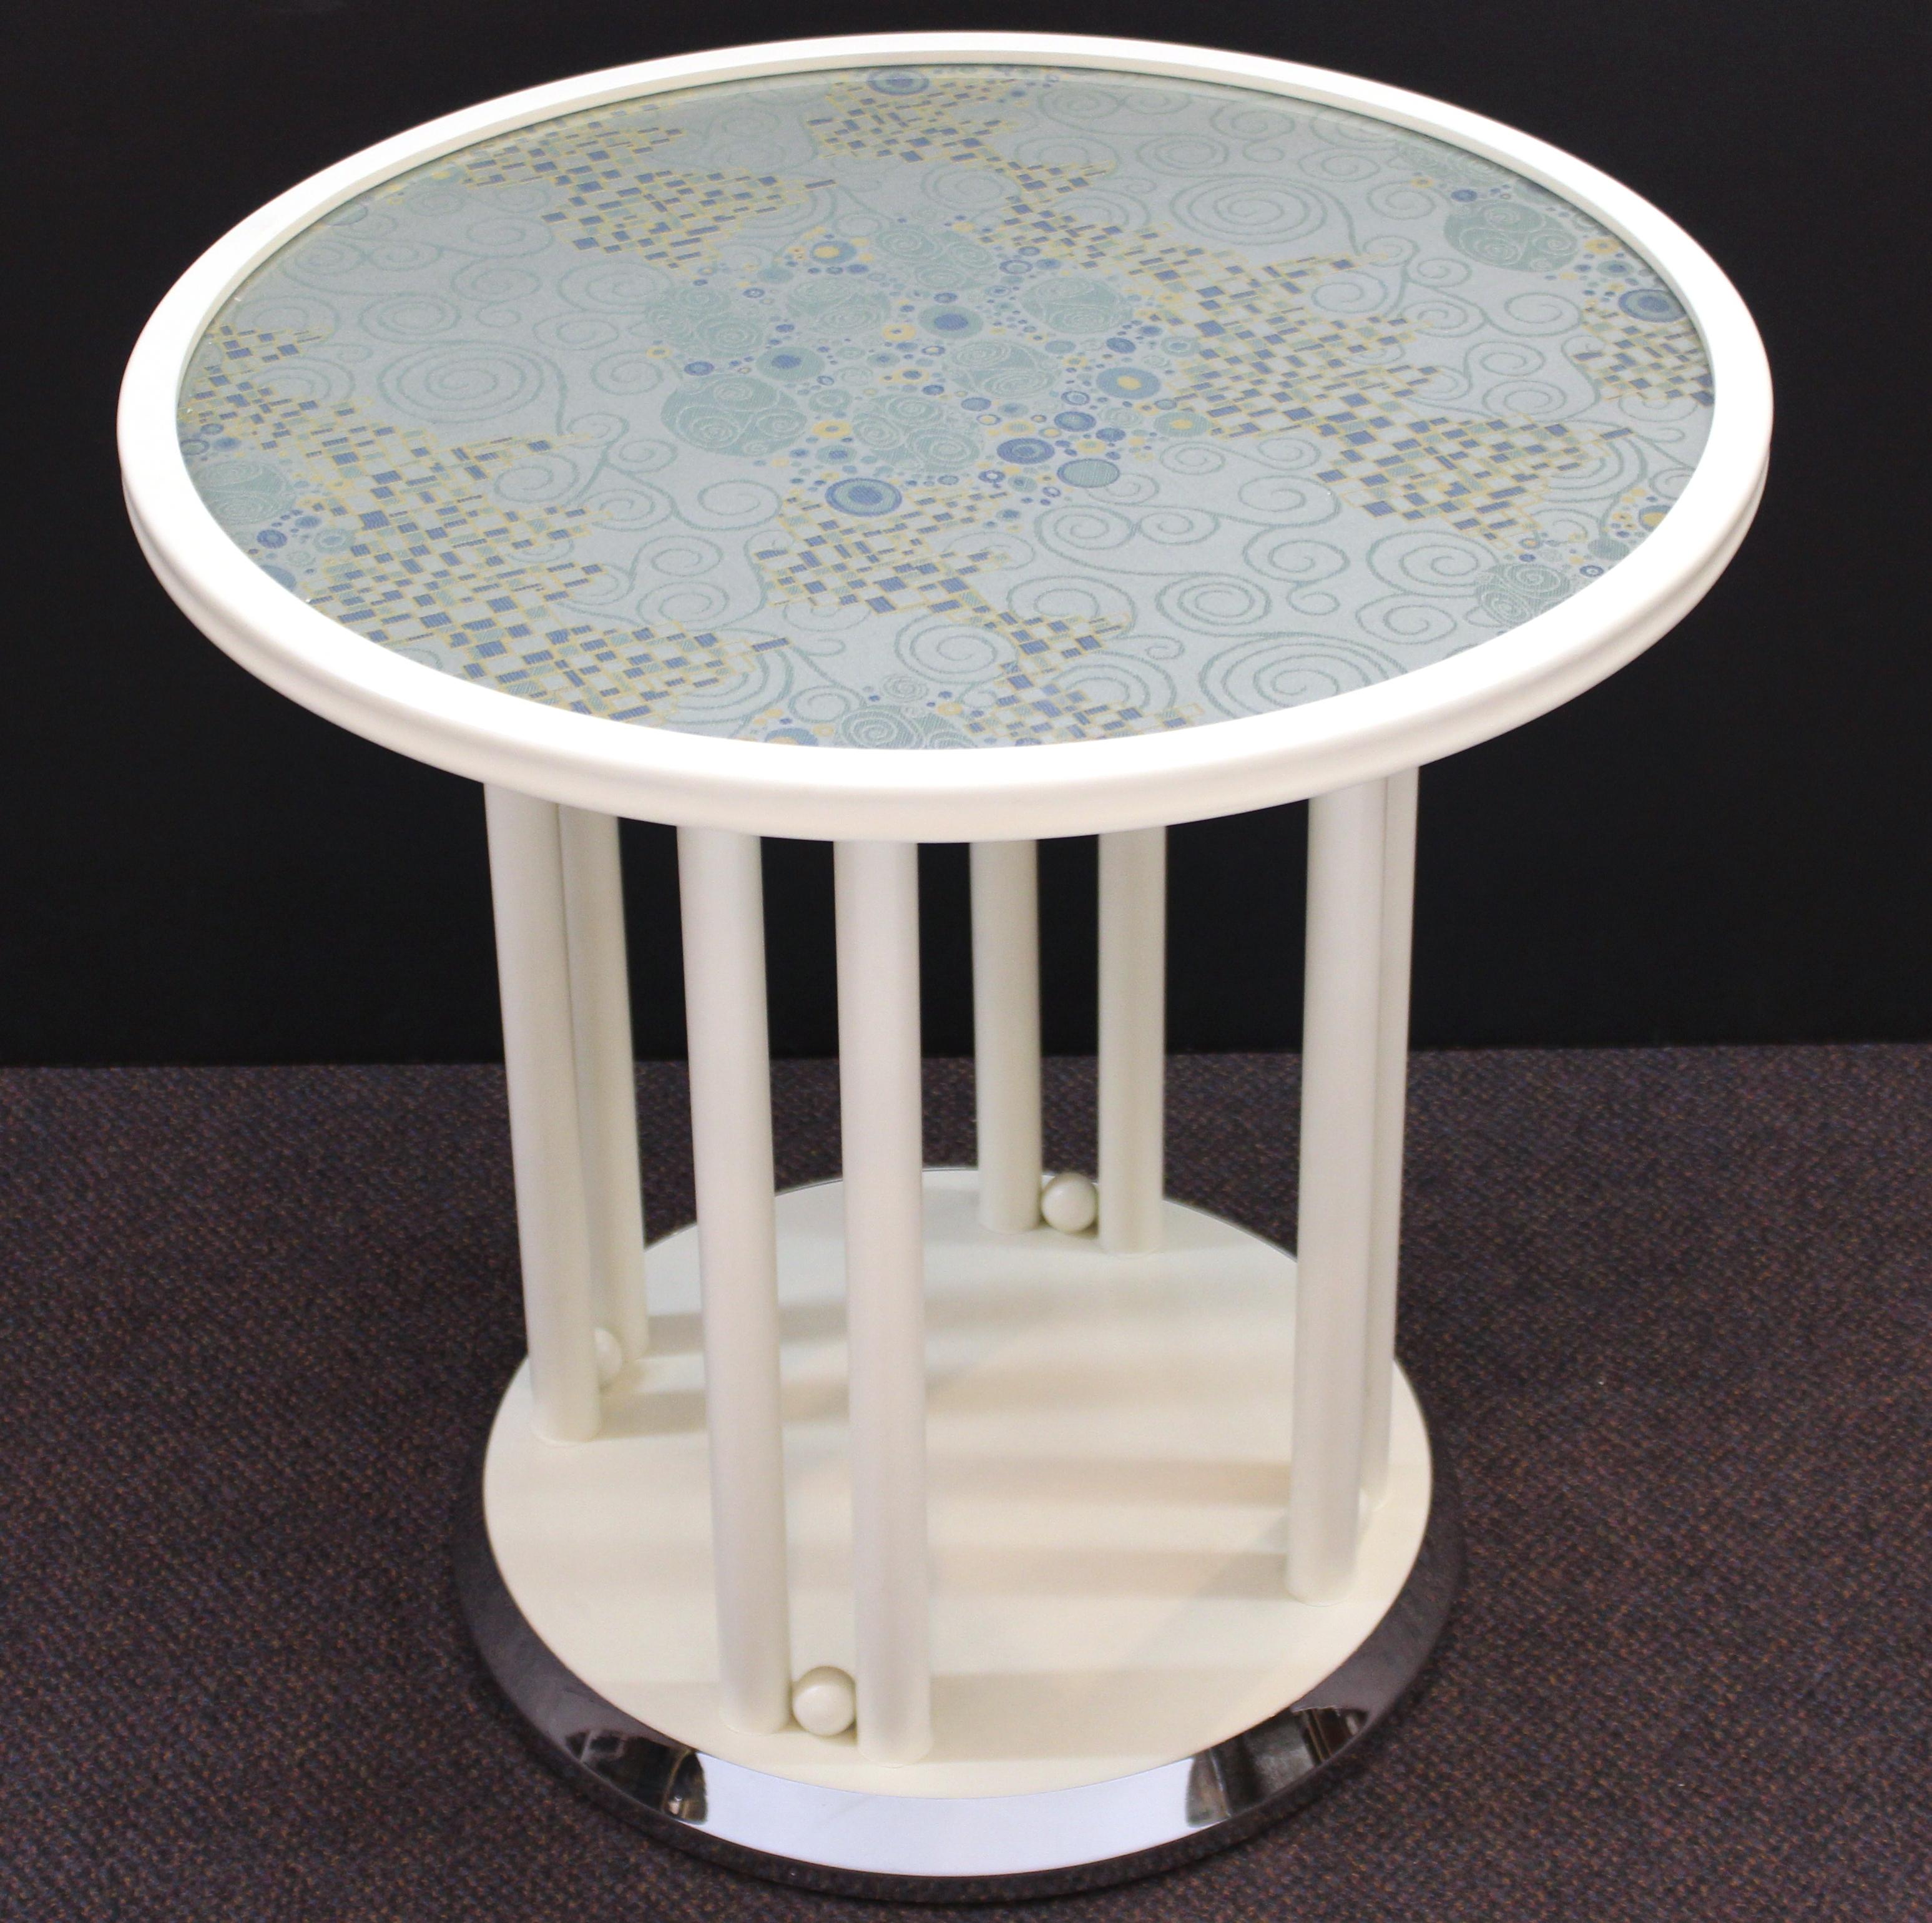 Viennese Secessionist 'Fledermaus' table in white, originally designed in 1907 for the Viennese Fledermaus cabaret by Josef Hoffmann and manufactured by Wittmann. The piece has a Secessionist style textile inlay underneath the circular glass top and